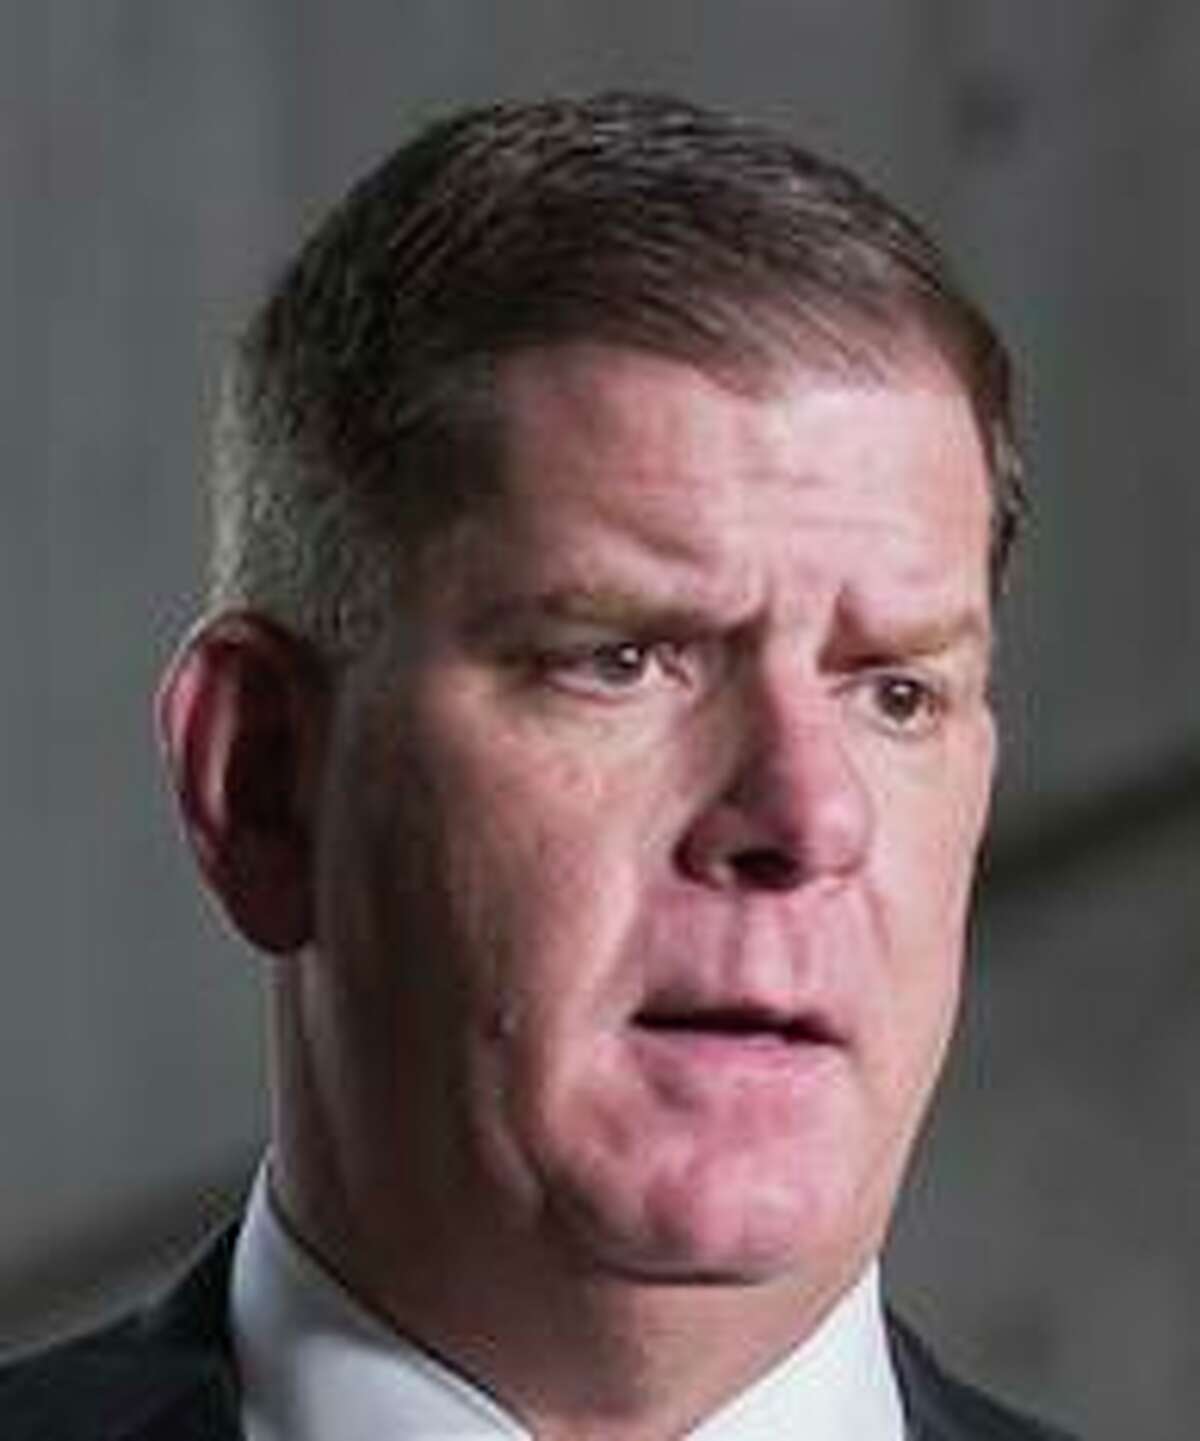 U.S. Labor Secretary Marty Walsh has offered to help in baseball negotiations.